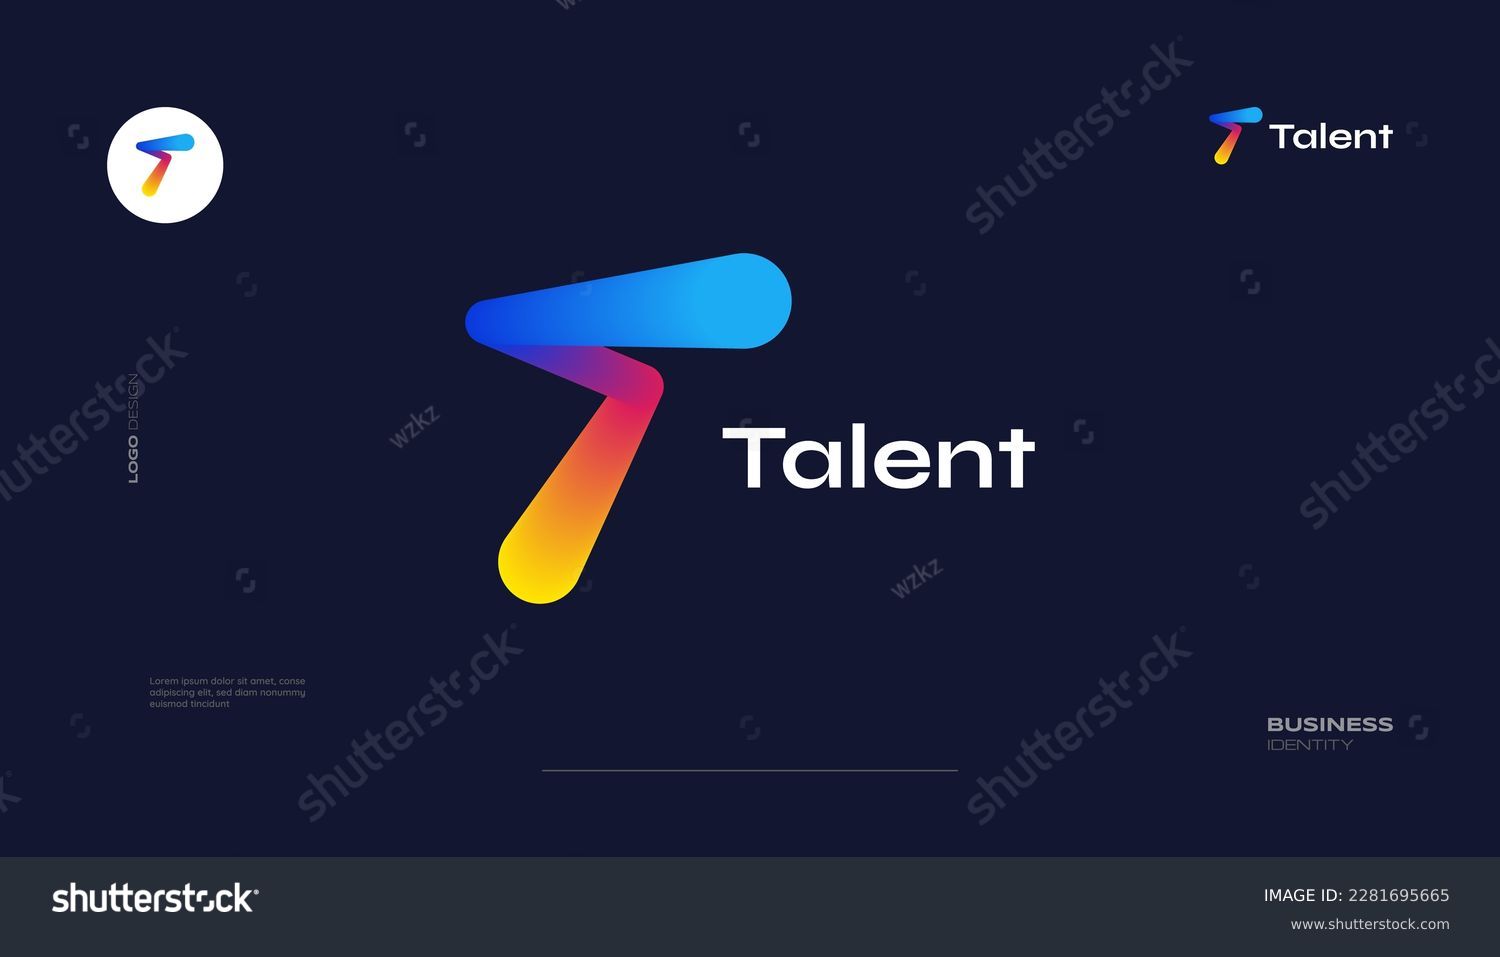 SVG of Creative and Vibrant Letter T Logo Design with Colorful Gradient Concept. T Logo with Blend Style for Business and Technology Brand Identity svg